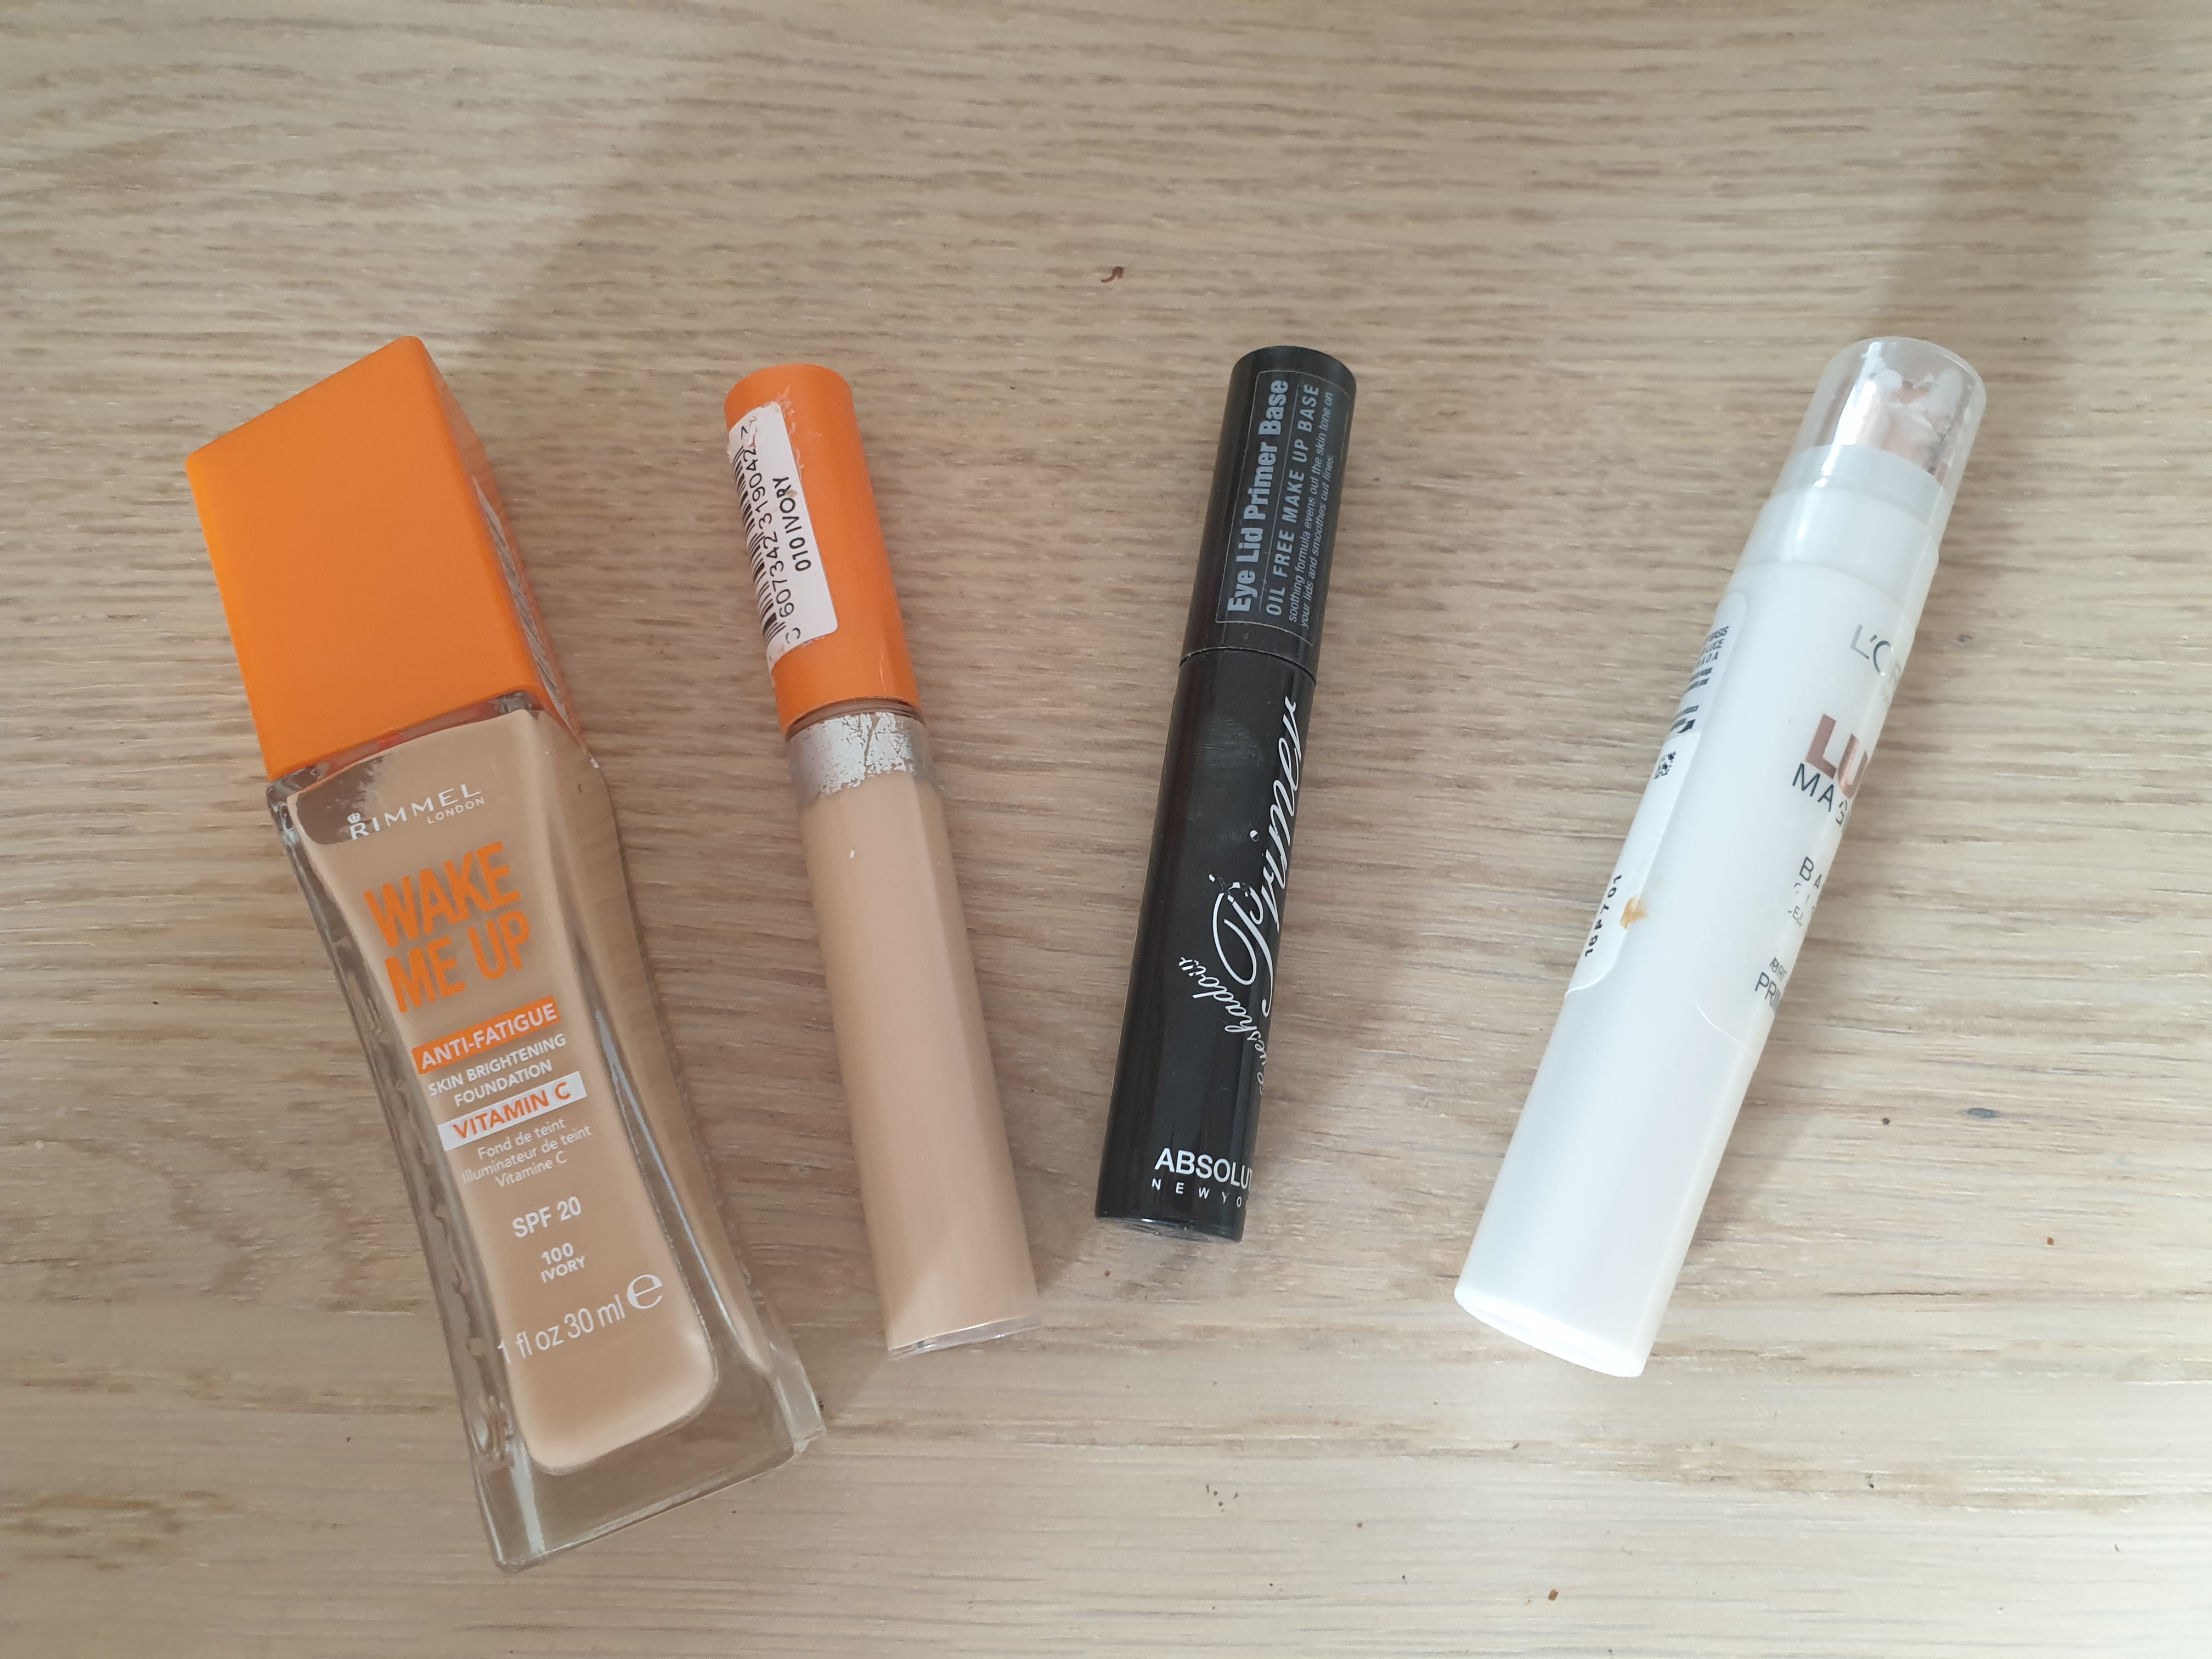 Make up products - the foundation, concealer, eye shadow primer and face primer mentioned within the post